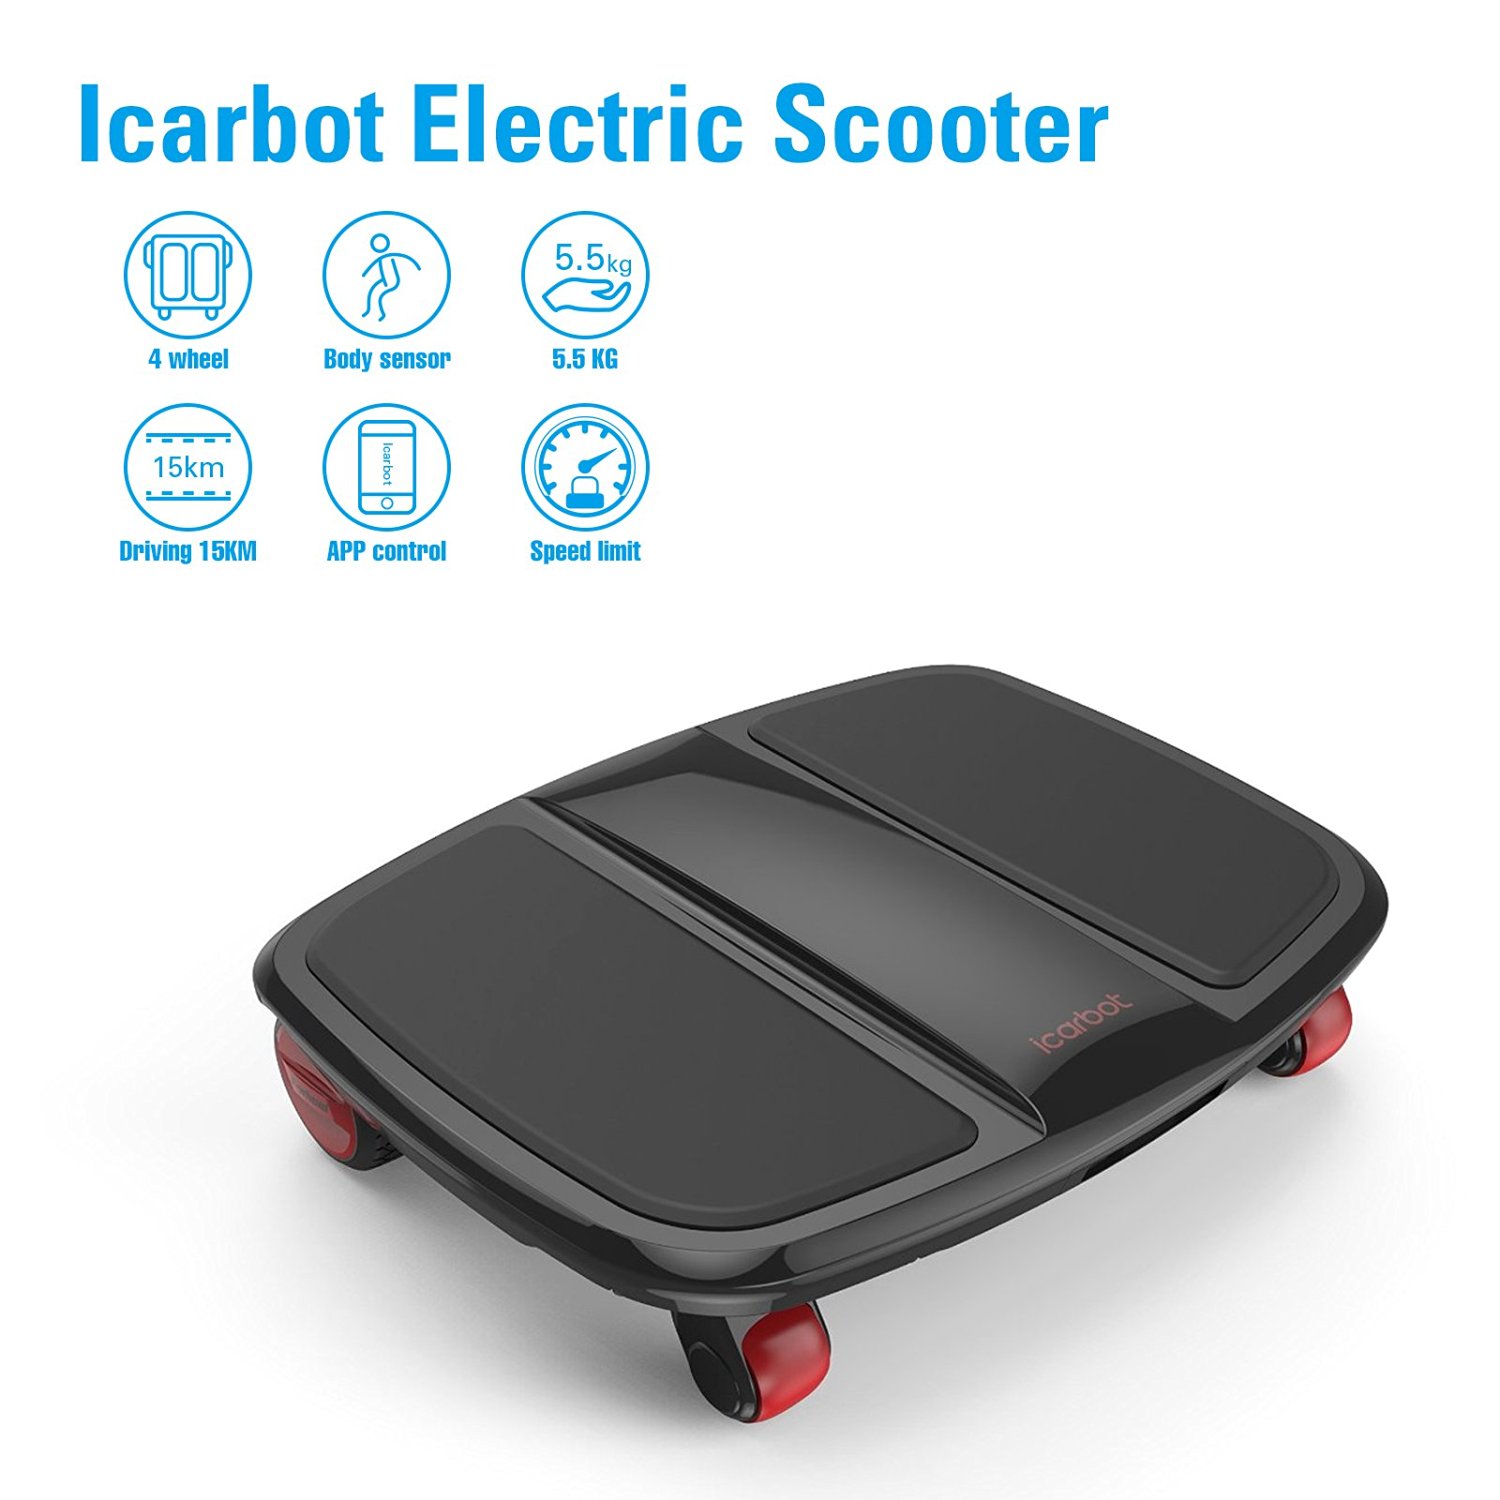 4 Wheels Self Balance Electric Hoverboard iCarbot Mini Smart Body Sensing Sctooter With APP